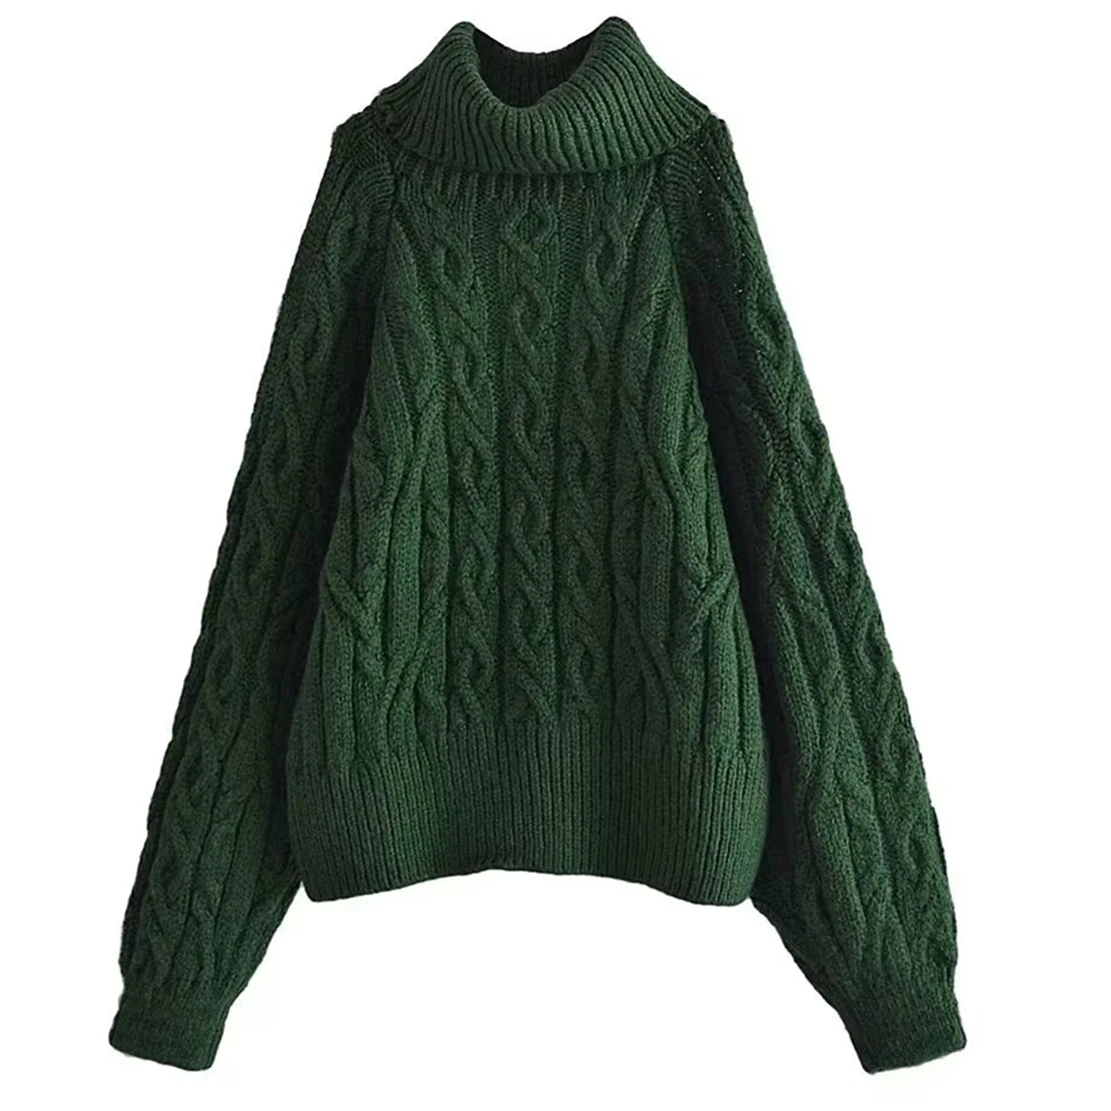 Dave&Di  Hollow Out In Shoulder Loose Sweaters Women Pullovers England Fashion Vintage Turtleneck Dark Green Sweaters